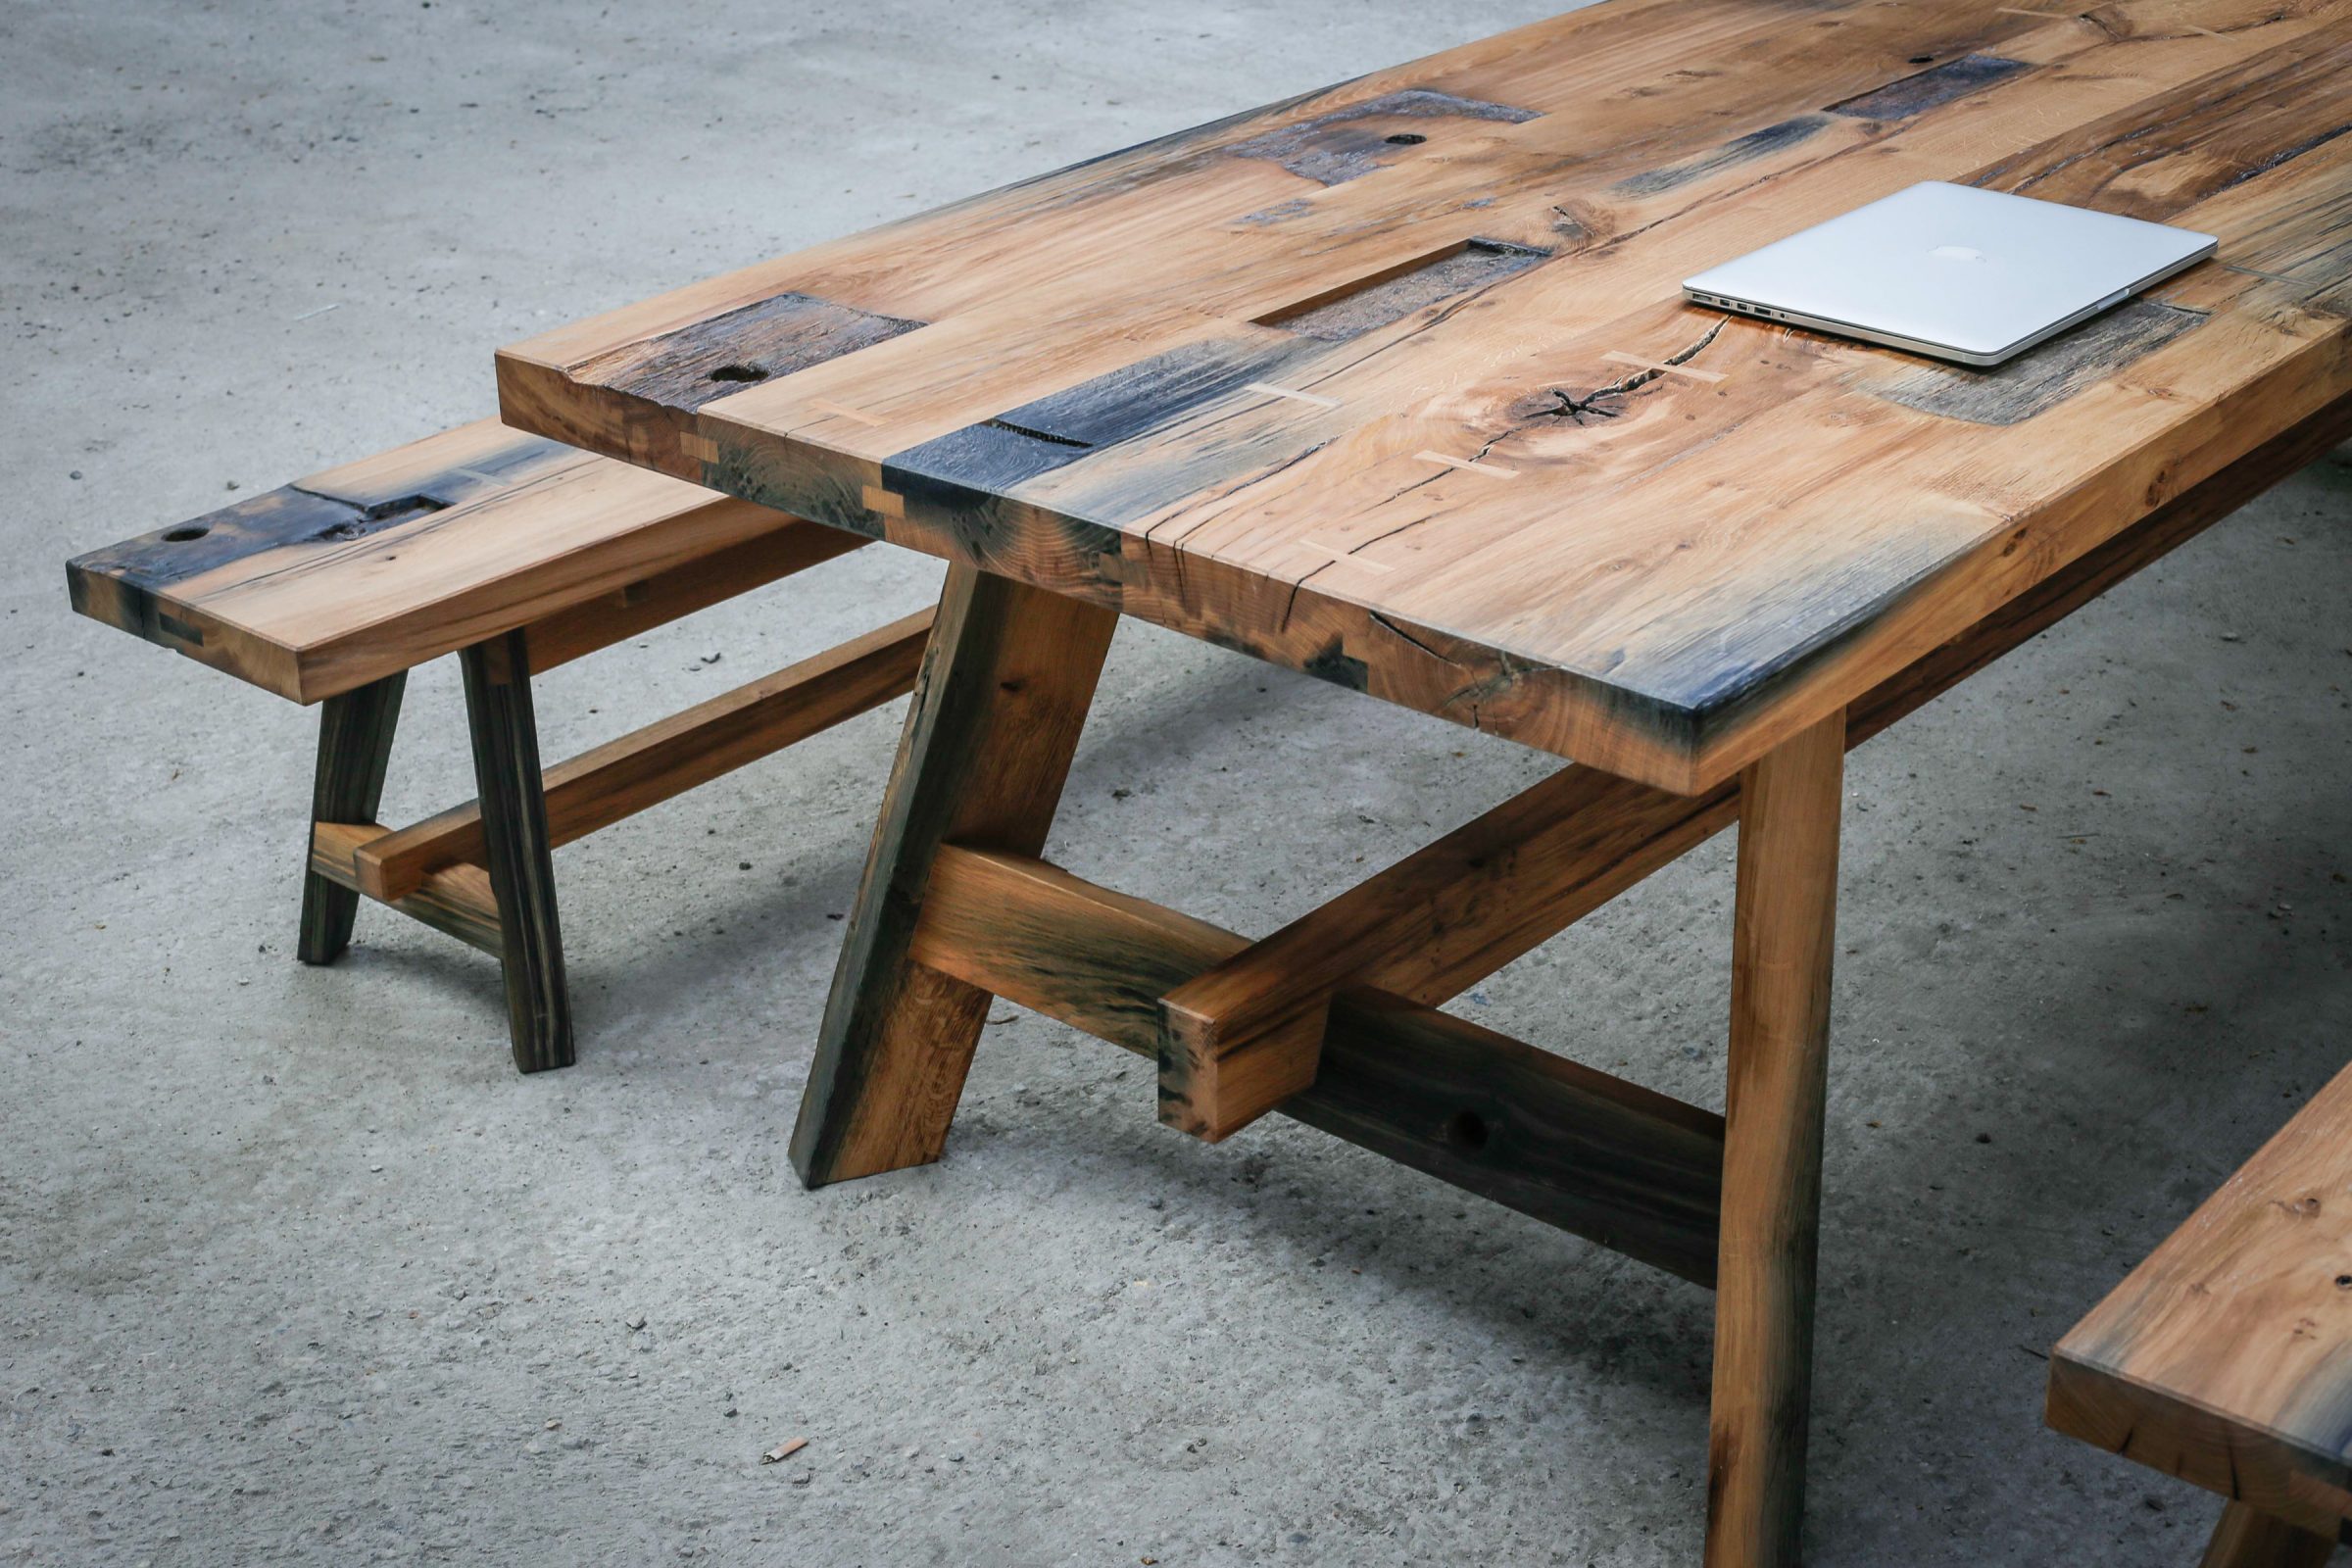 Black Oak table reclaimed timber from Avon and Kennet canal. Large table beautiful timber